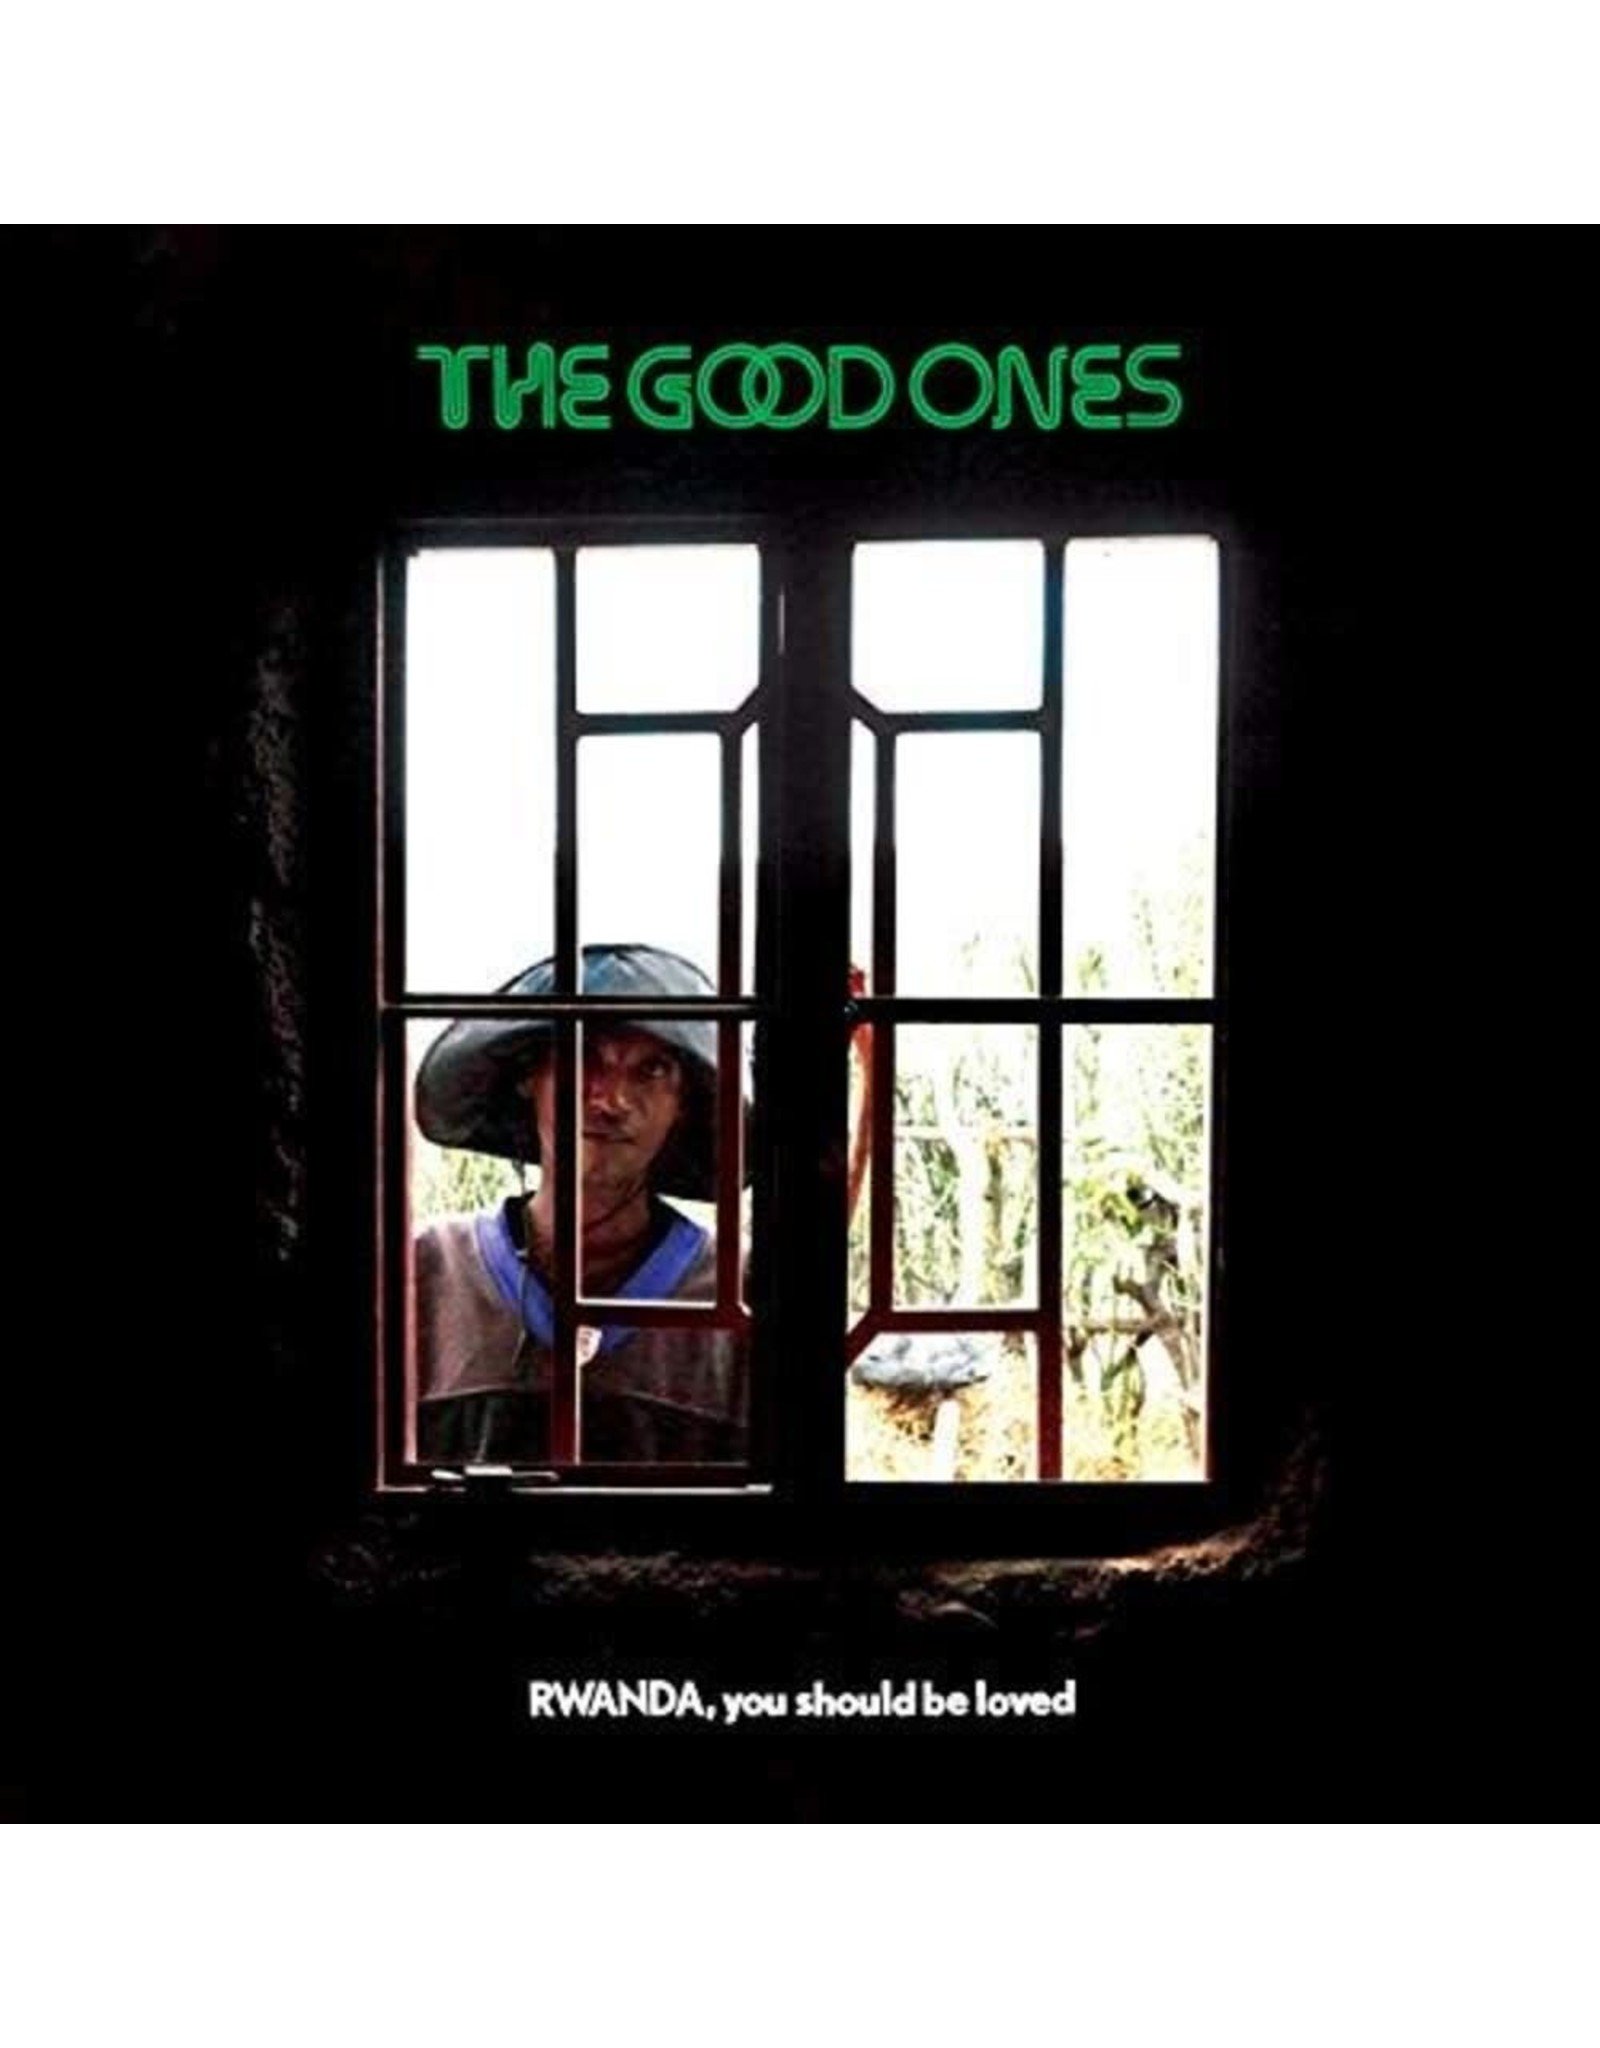 Good Ones, The - Rwanda, You Should Be Loved CD